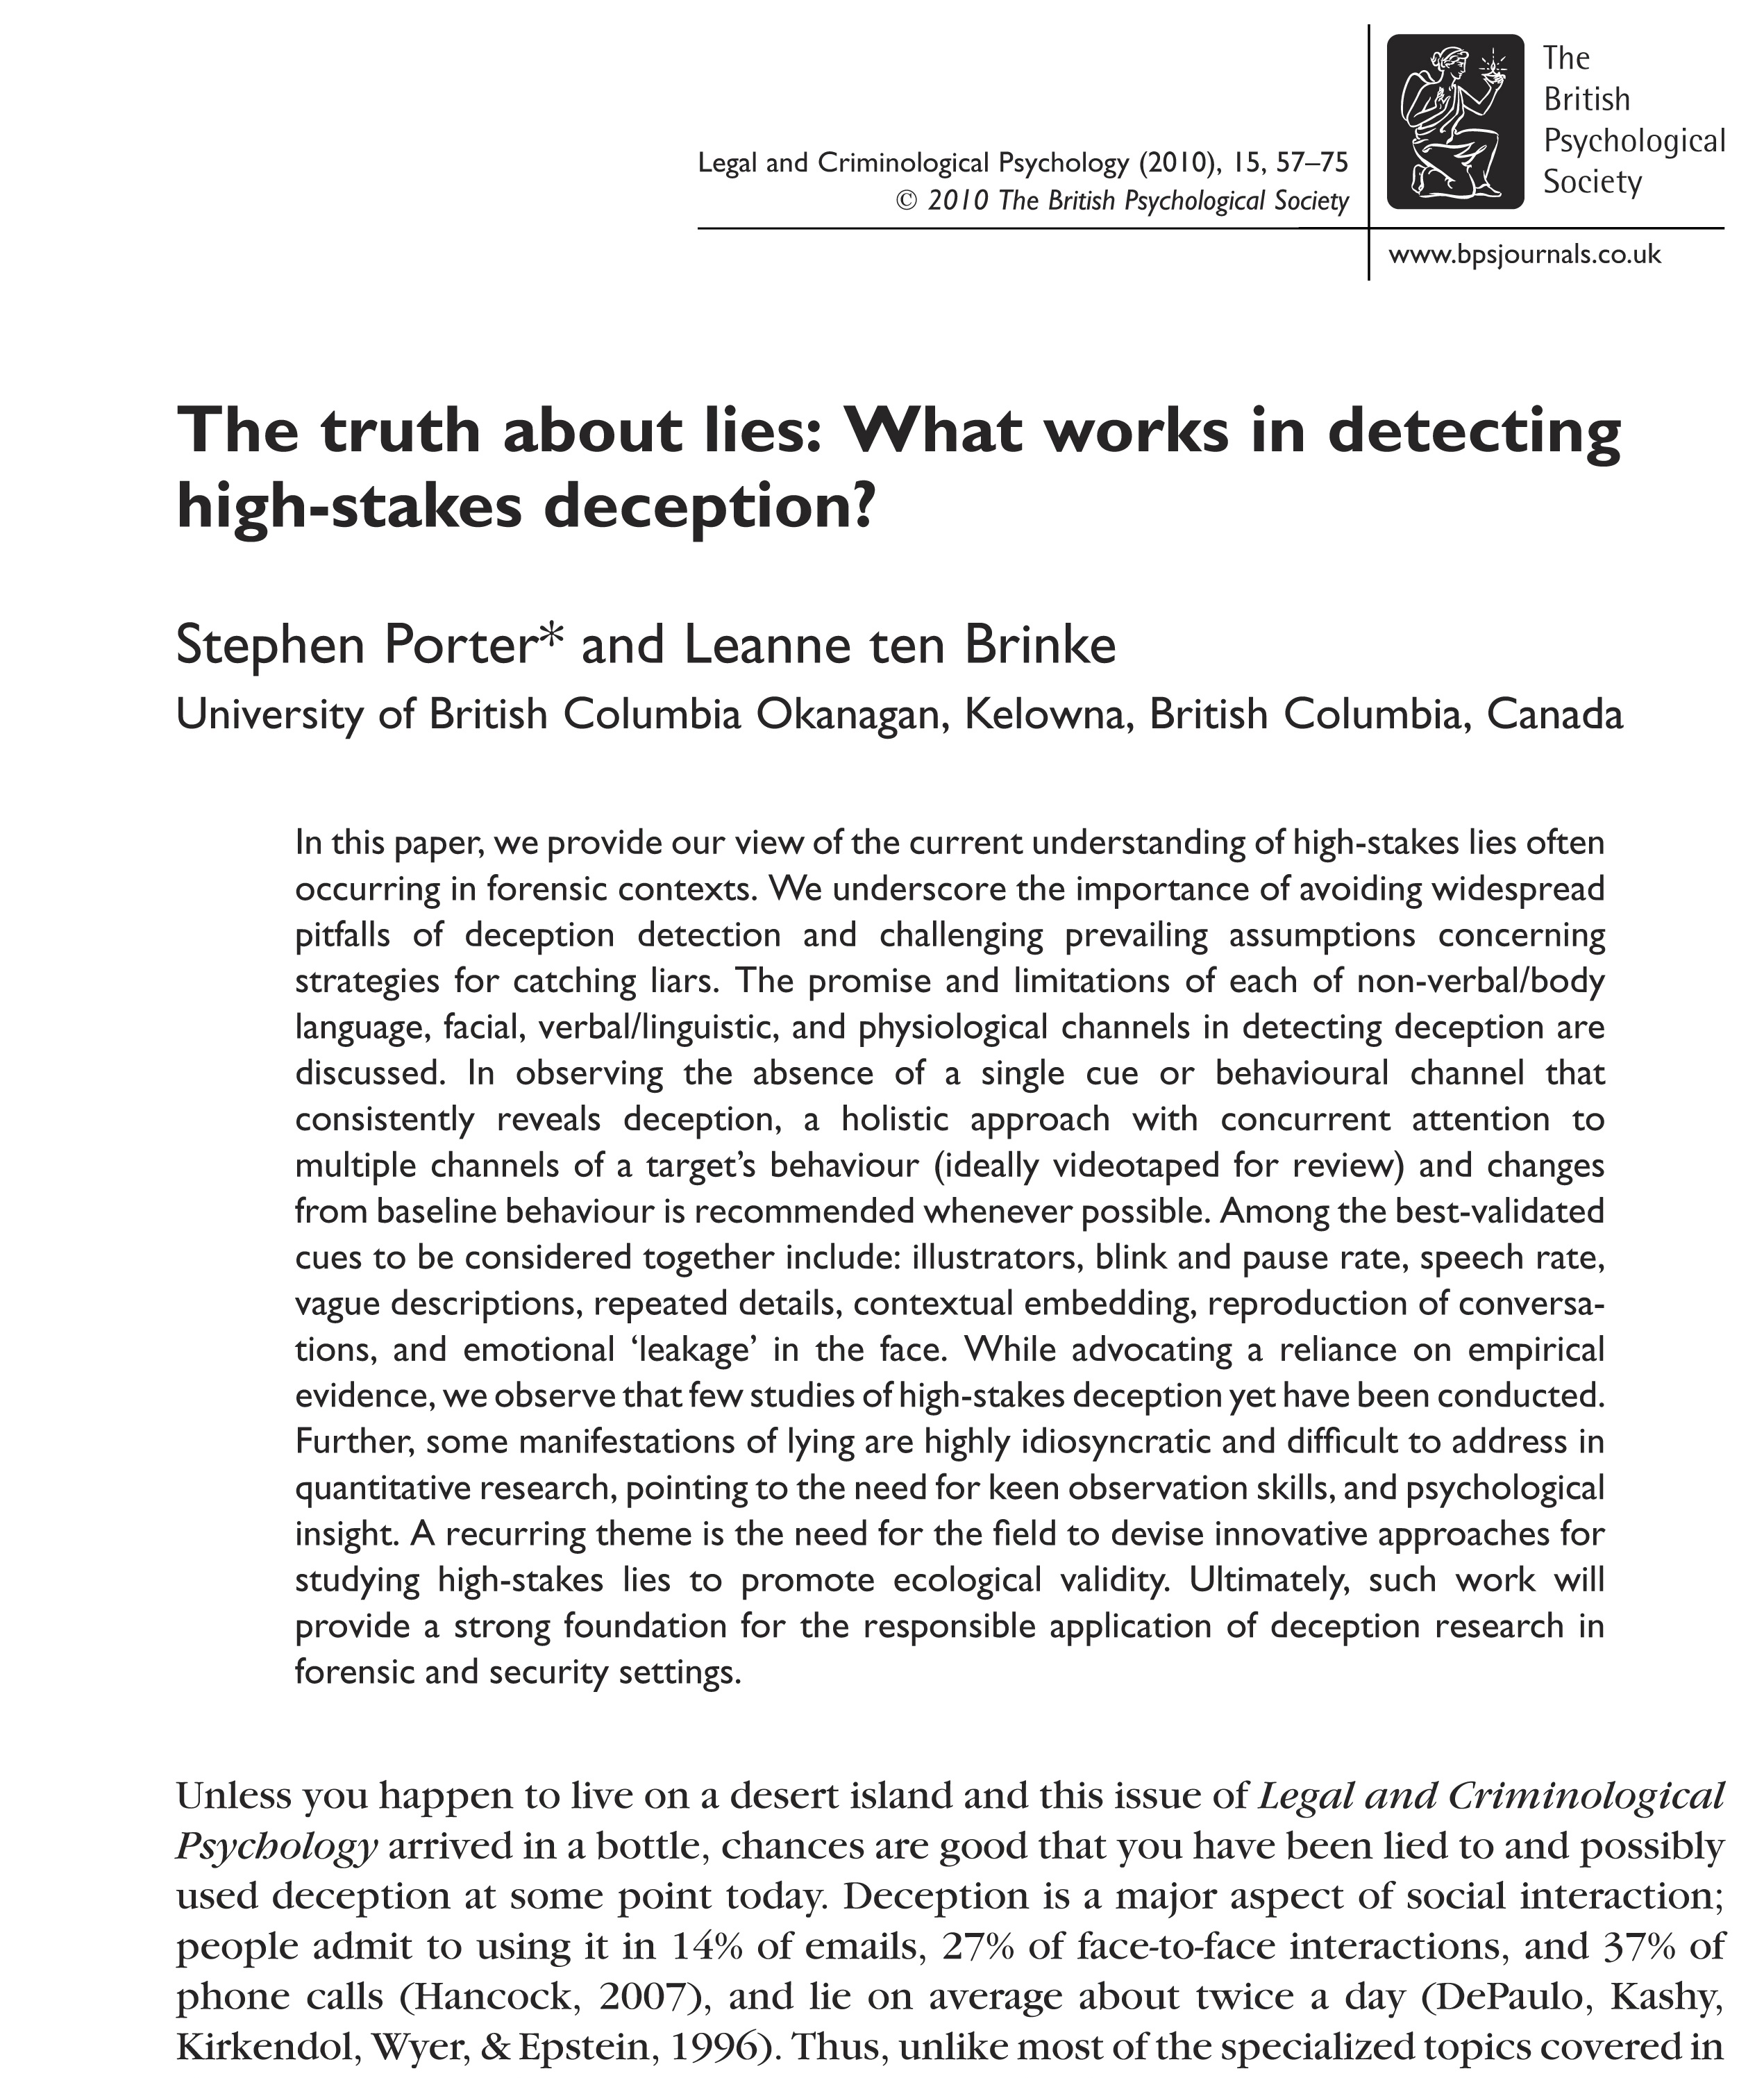 The photo of a journal article entitled “The truth about lies: what works in detecting high-stakes deception?” provides information about how well various nonverbal cues indicate when someone is lying.